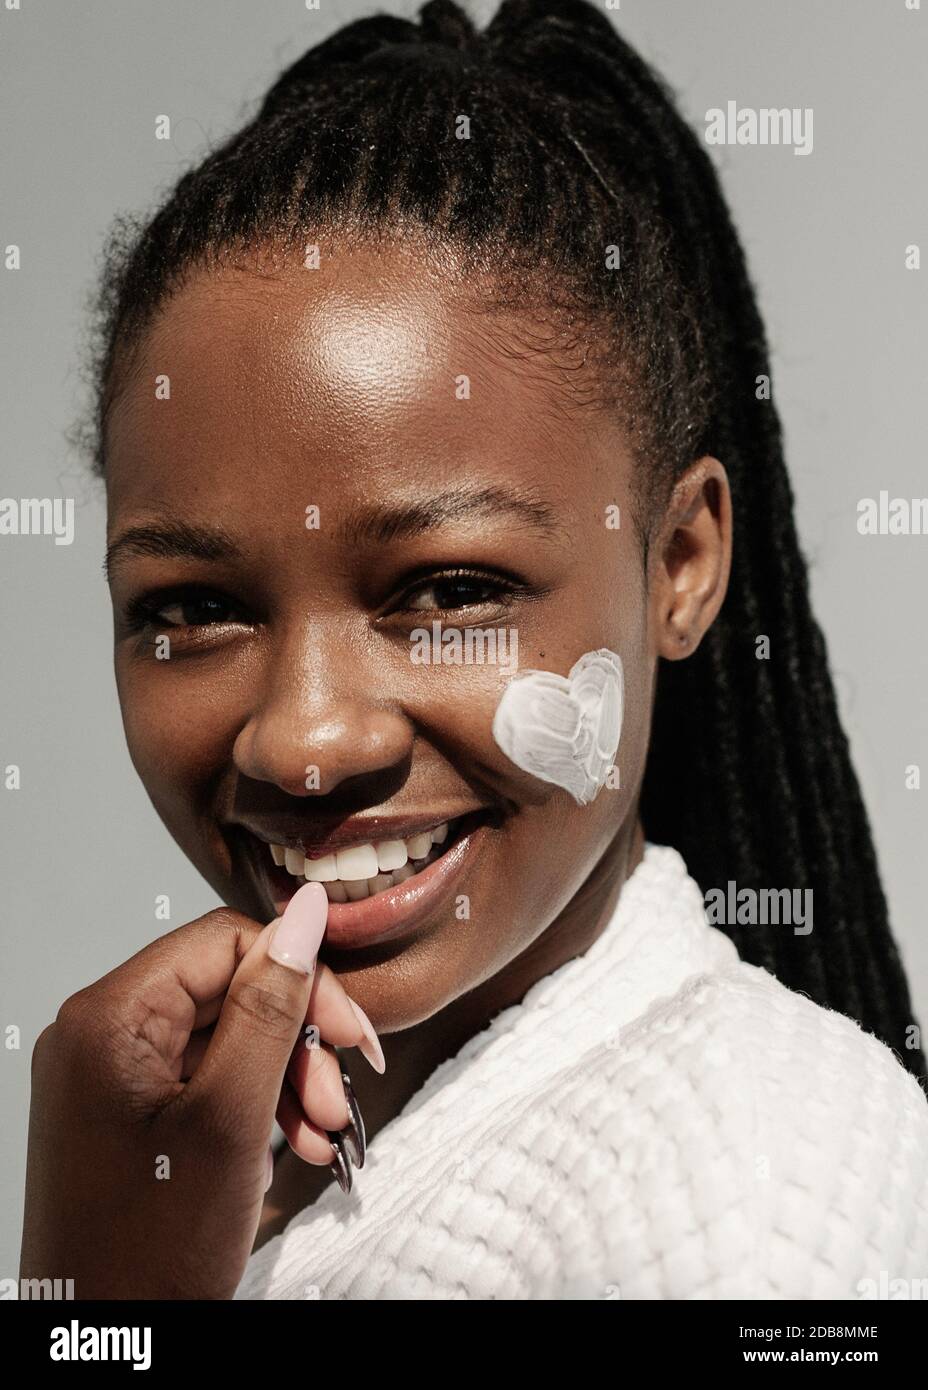 Portrait of a Smiling woman with cream on her face in a heart shape Stock Photo